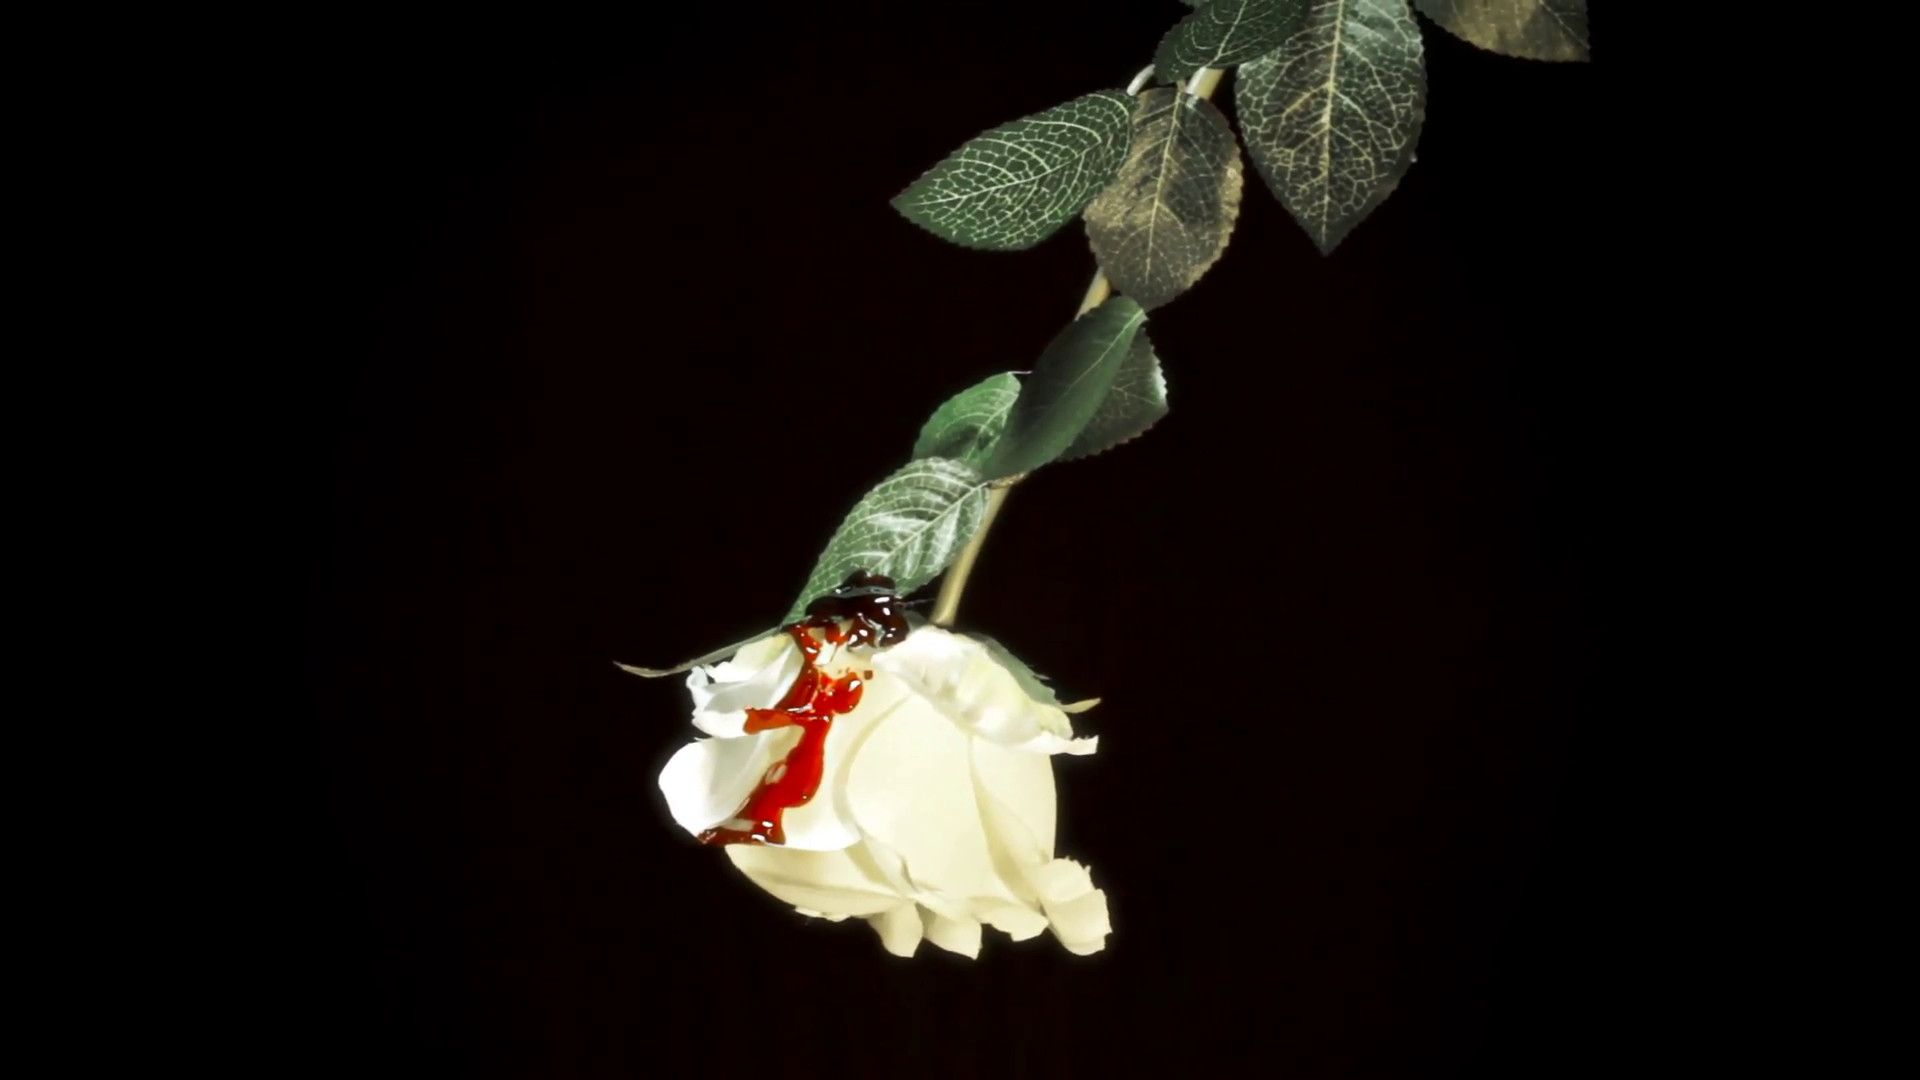 1920x1080 White rose bloody. Close up of a white rose with red blood over the petals,  isolated on a black background. Symbolic shot: violence, innocence lost, ...